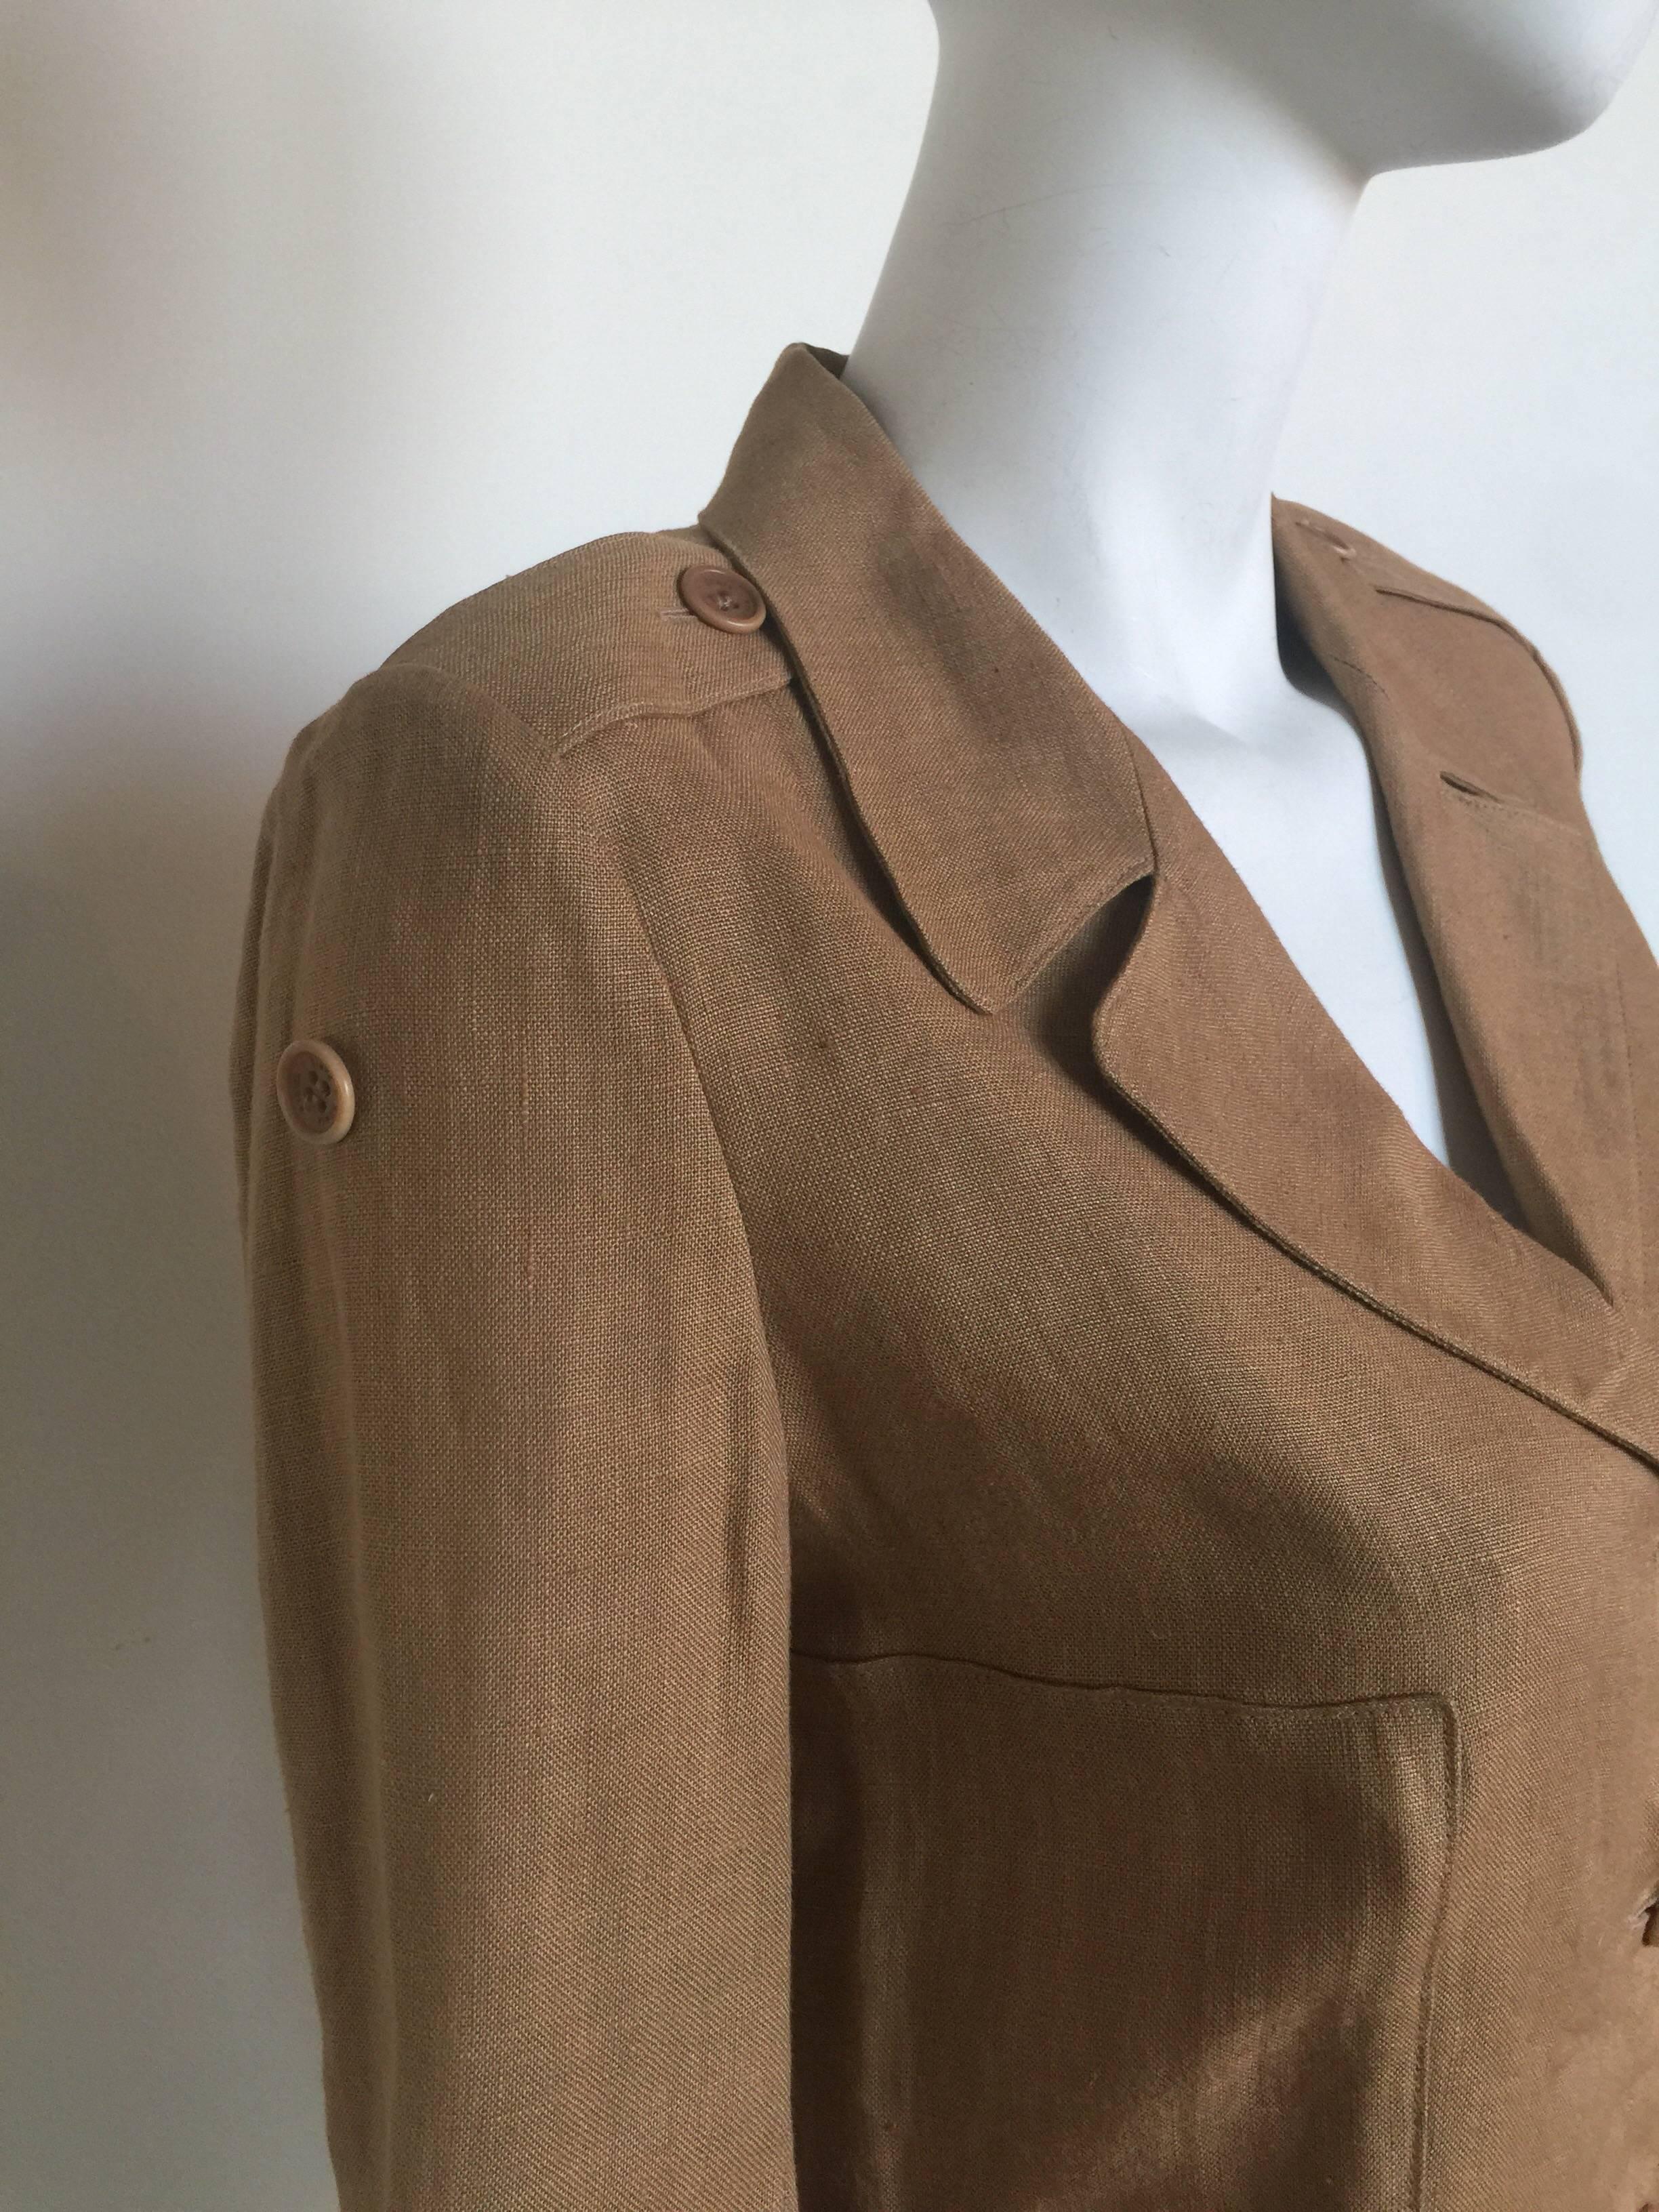 Sonia Rykiel camel linen blazer  In Excellent Condition For Sale In New York, NY